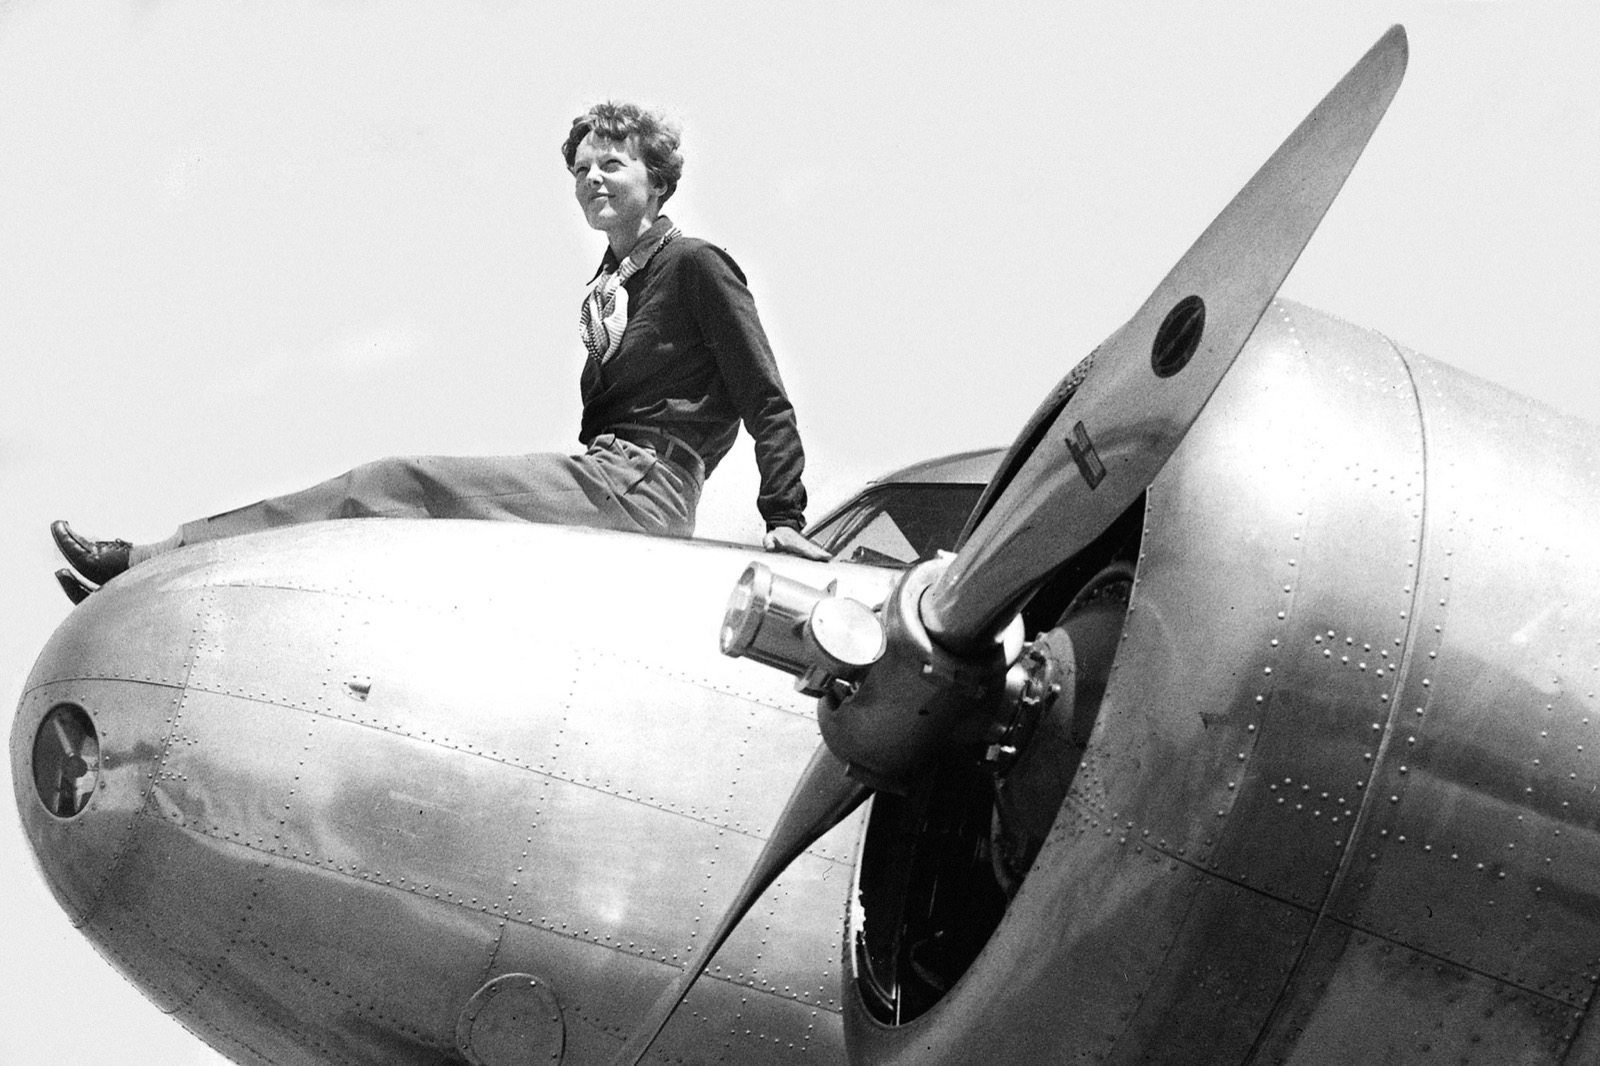 Your Random Knowledge Is Lacking If You Don’t Get 15/25 on This Quiz Amelia Earhart